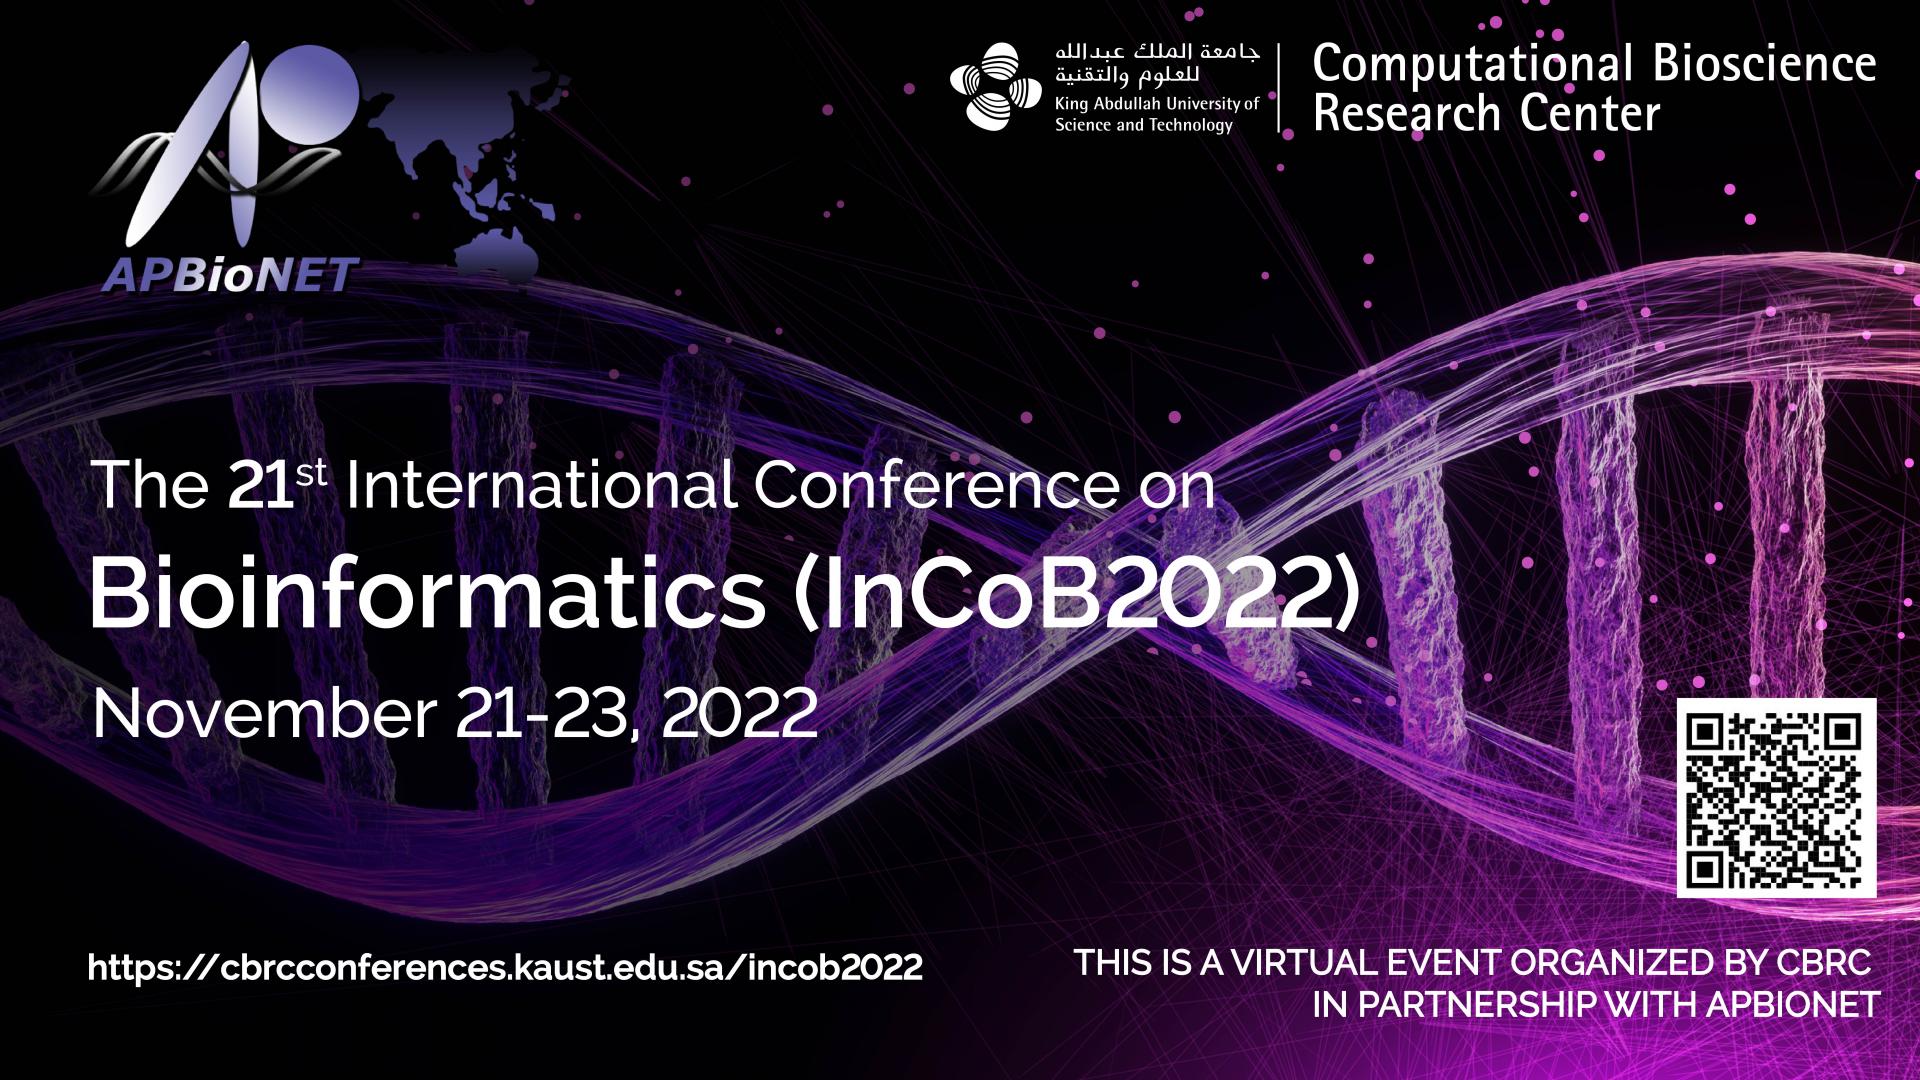 The 21st International Conference on Bioinformatics (InCoB2022) CEMSE